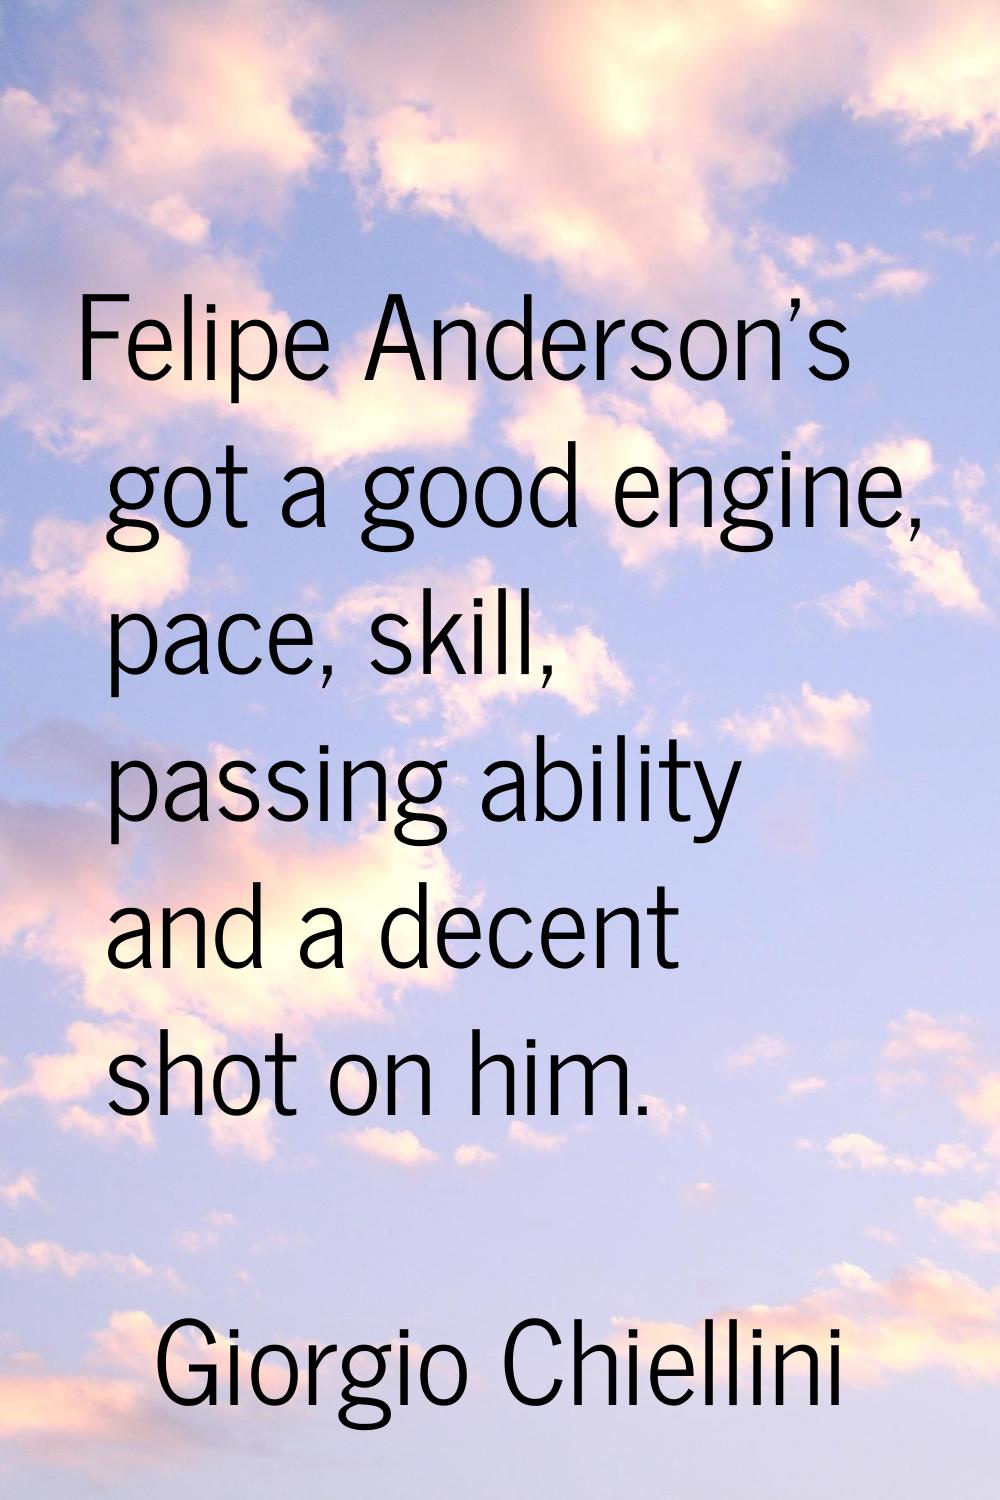 Felipe Anderson's got a good engine, pace, skill, passing ability and a decent shot on him.